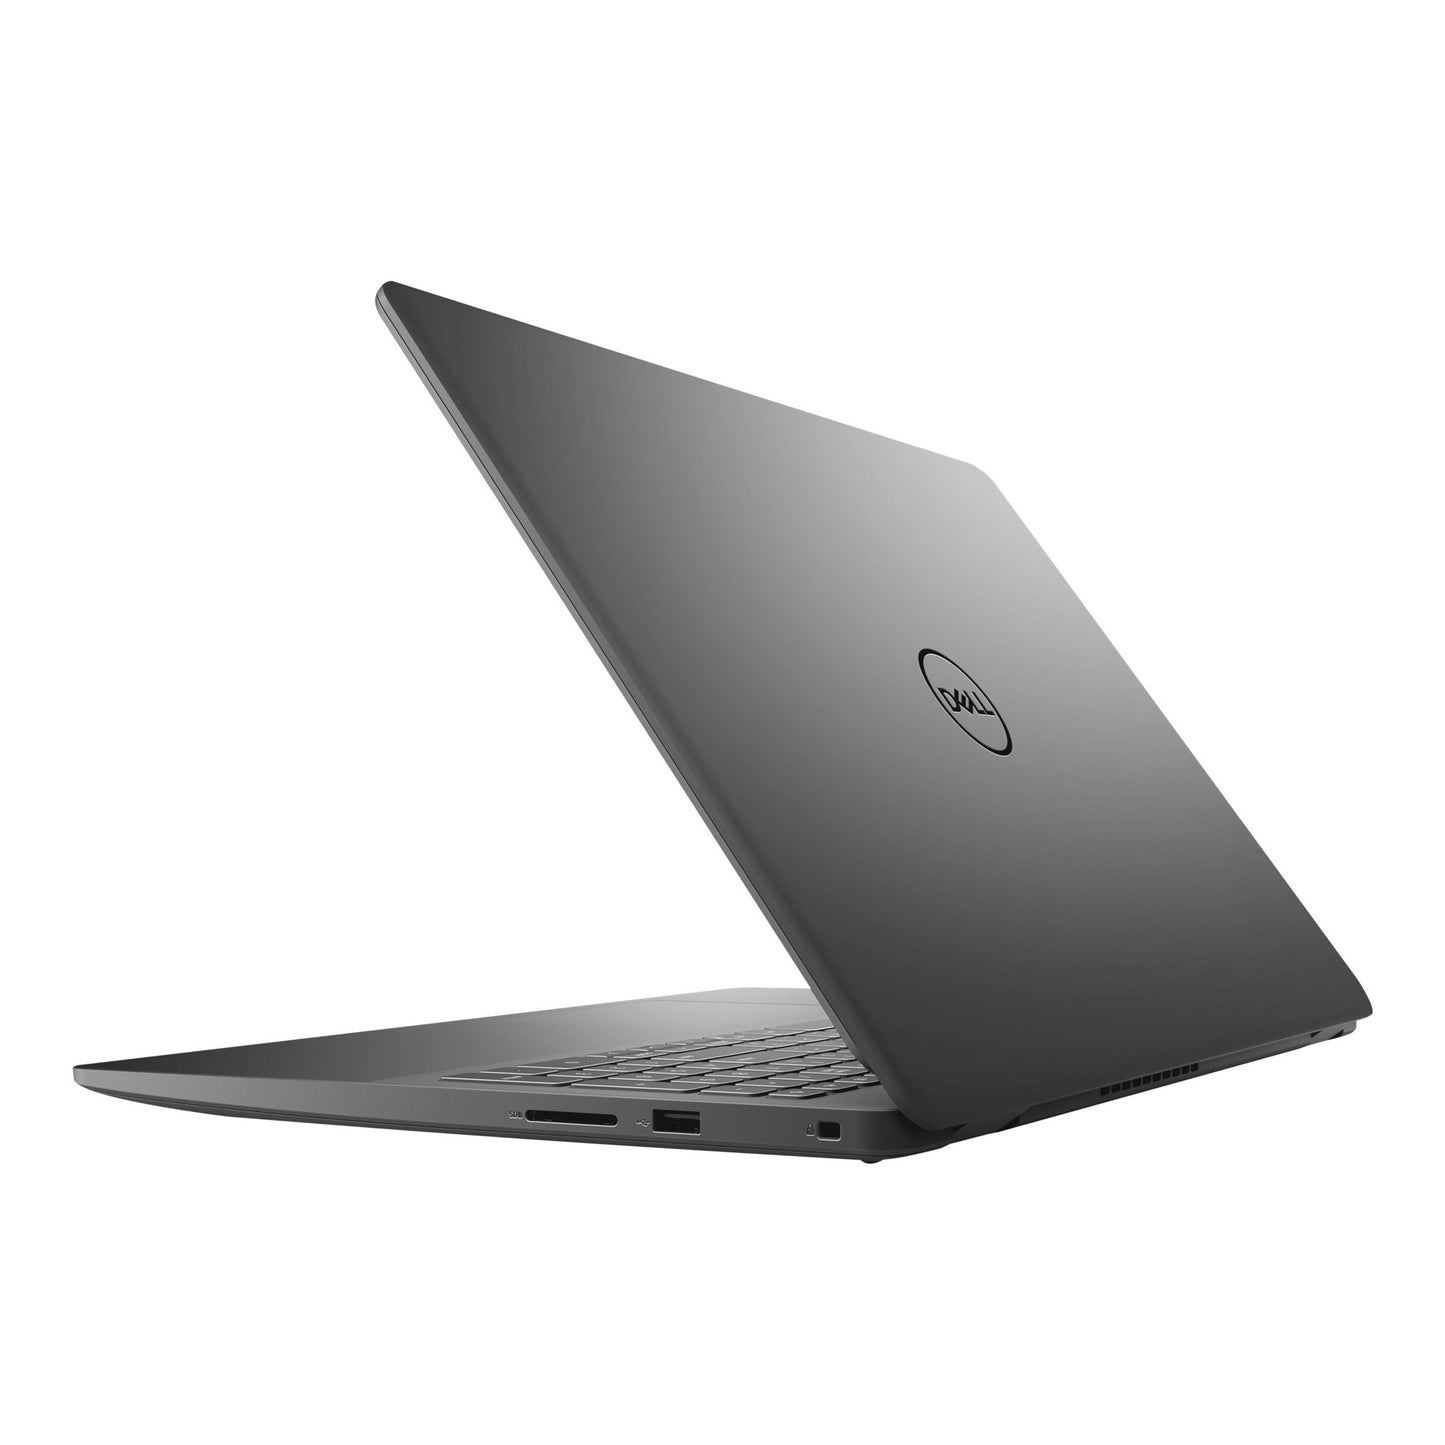 Dell Inspiron 3501 i5-1135G7 VGA Iris Xe Laptop Offers (New Open Box) Gaming laptop, Graphic Design laptop, best laptop for gaming, best laptop for graphic design, computer for sale Lebanon, laptop for video editing in Lebanon, laptop for sale Lebanon, best graphic design laptop,	best video editing laptop, best programming laptop, laptop for sale in Lebanon, laptops for sale in Lebanon, laptop for sale in Lebanon, buy computer Lebanon, buy laptop Lebanon.